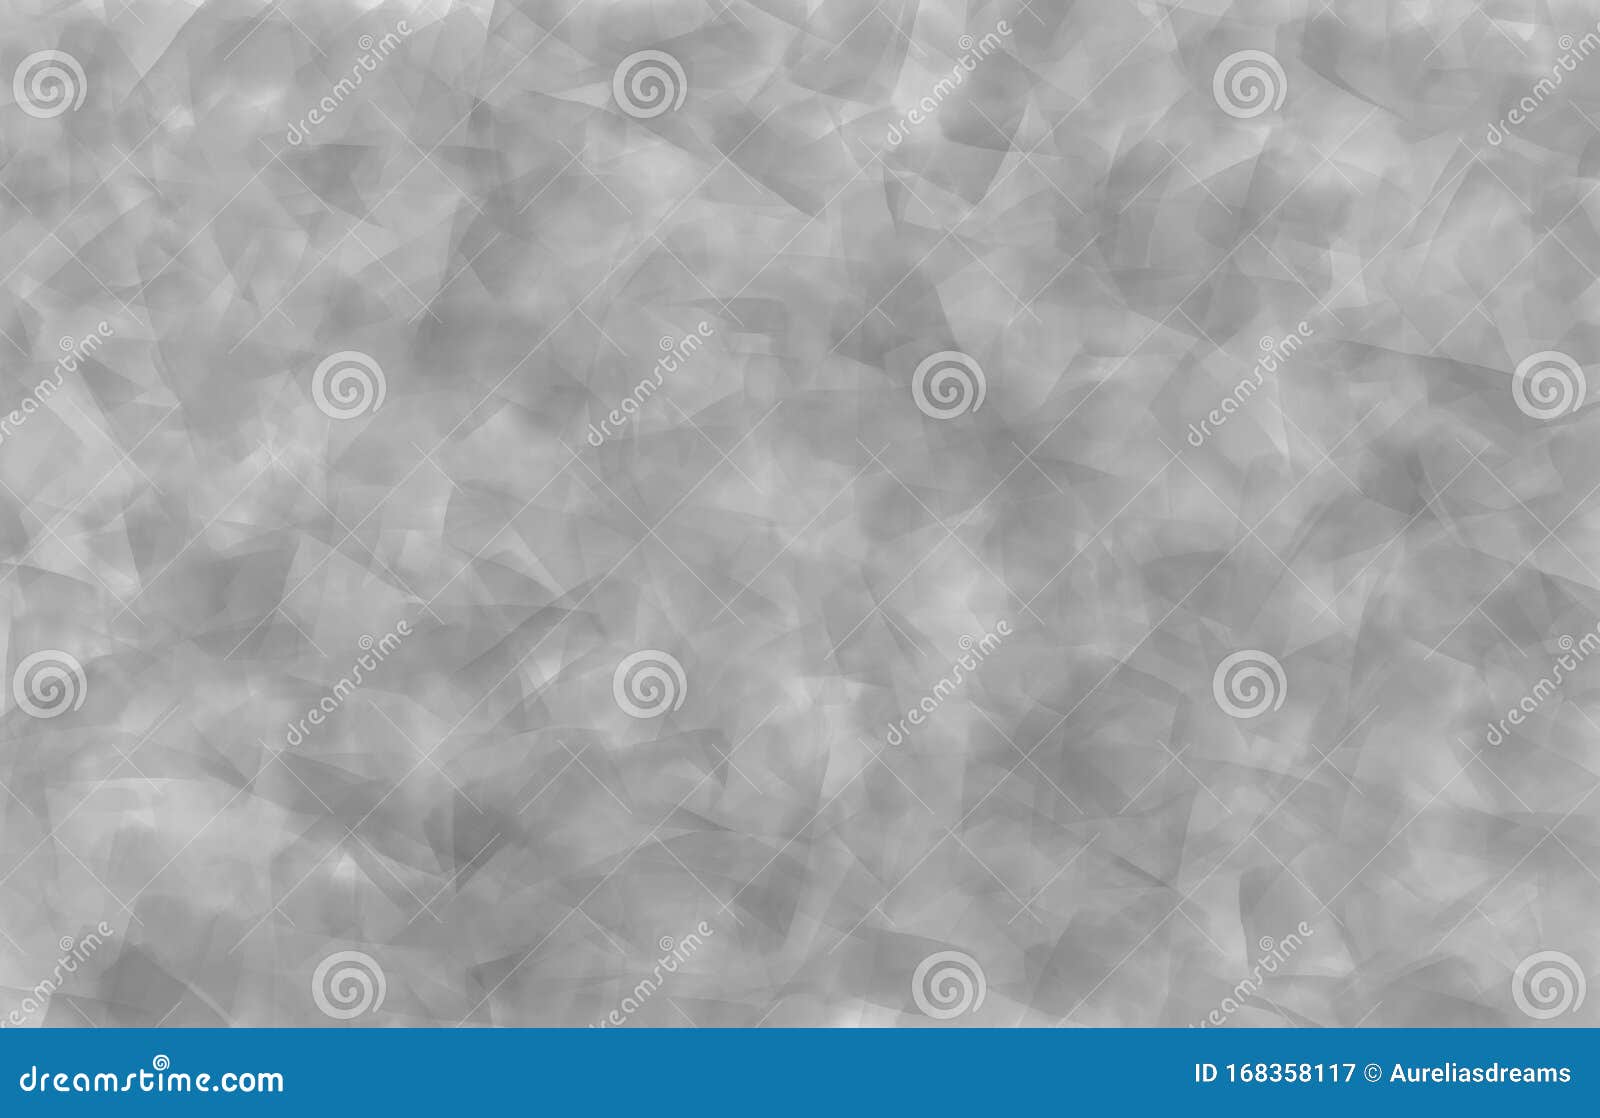 Digital Painting Background. Variety Paint Shapes in Black and White ...